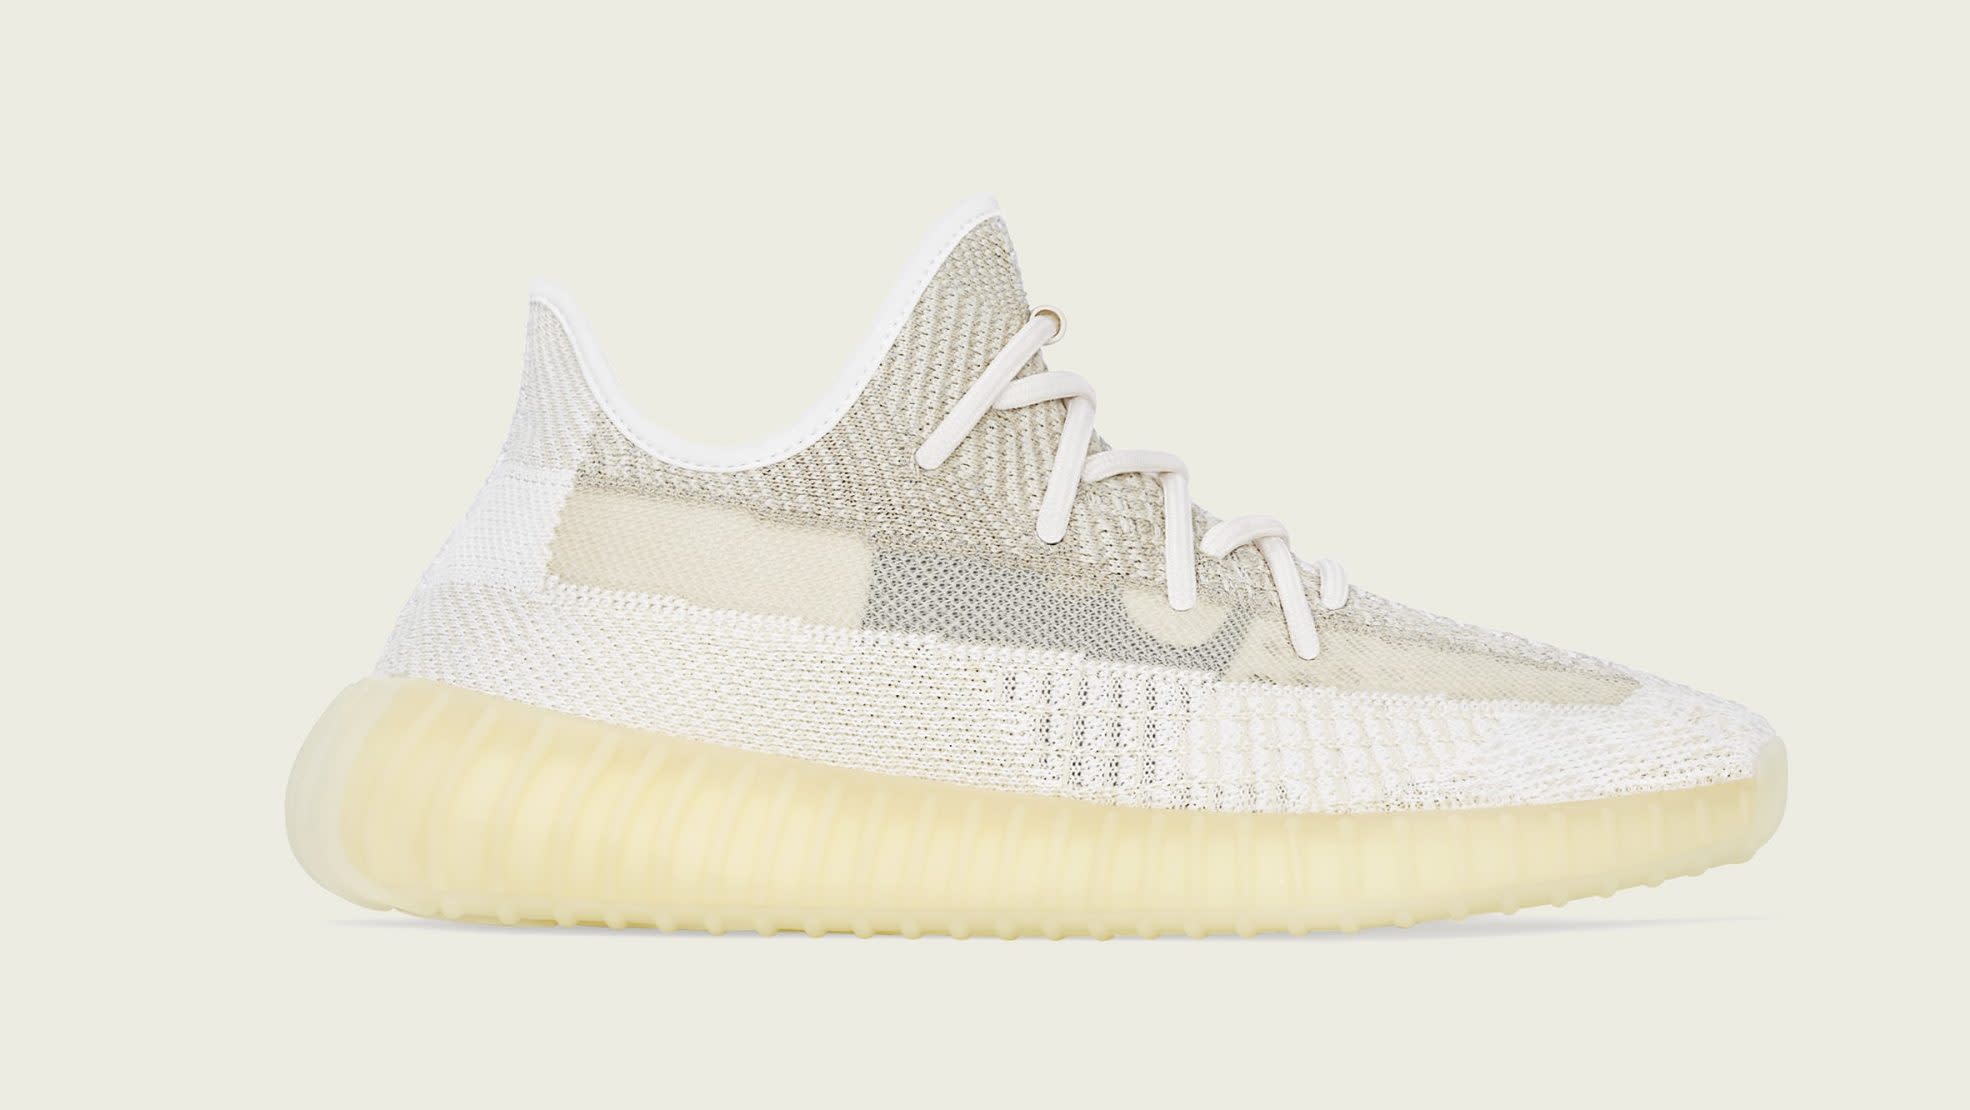 The Adidas Yeezy Boost 350 V2 'Natural' Is Releasing This Week